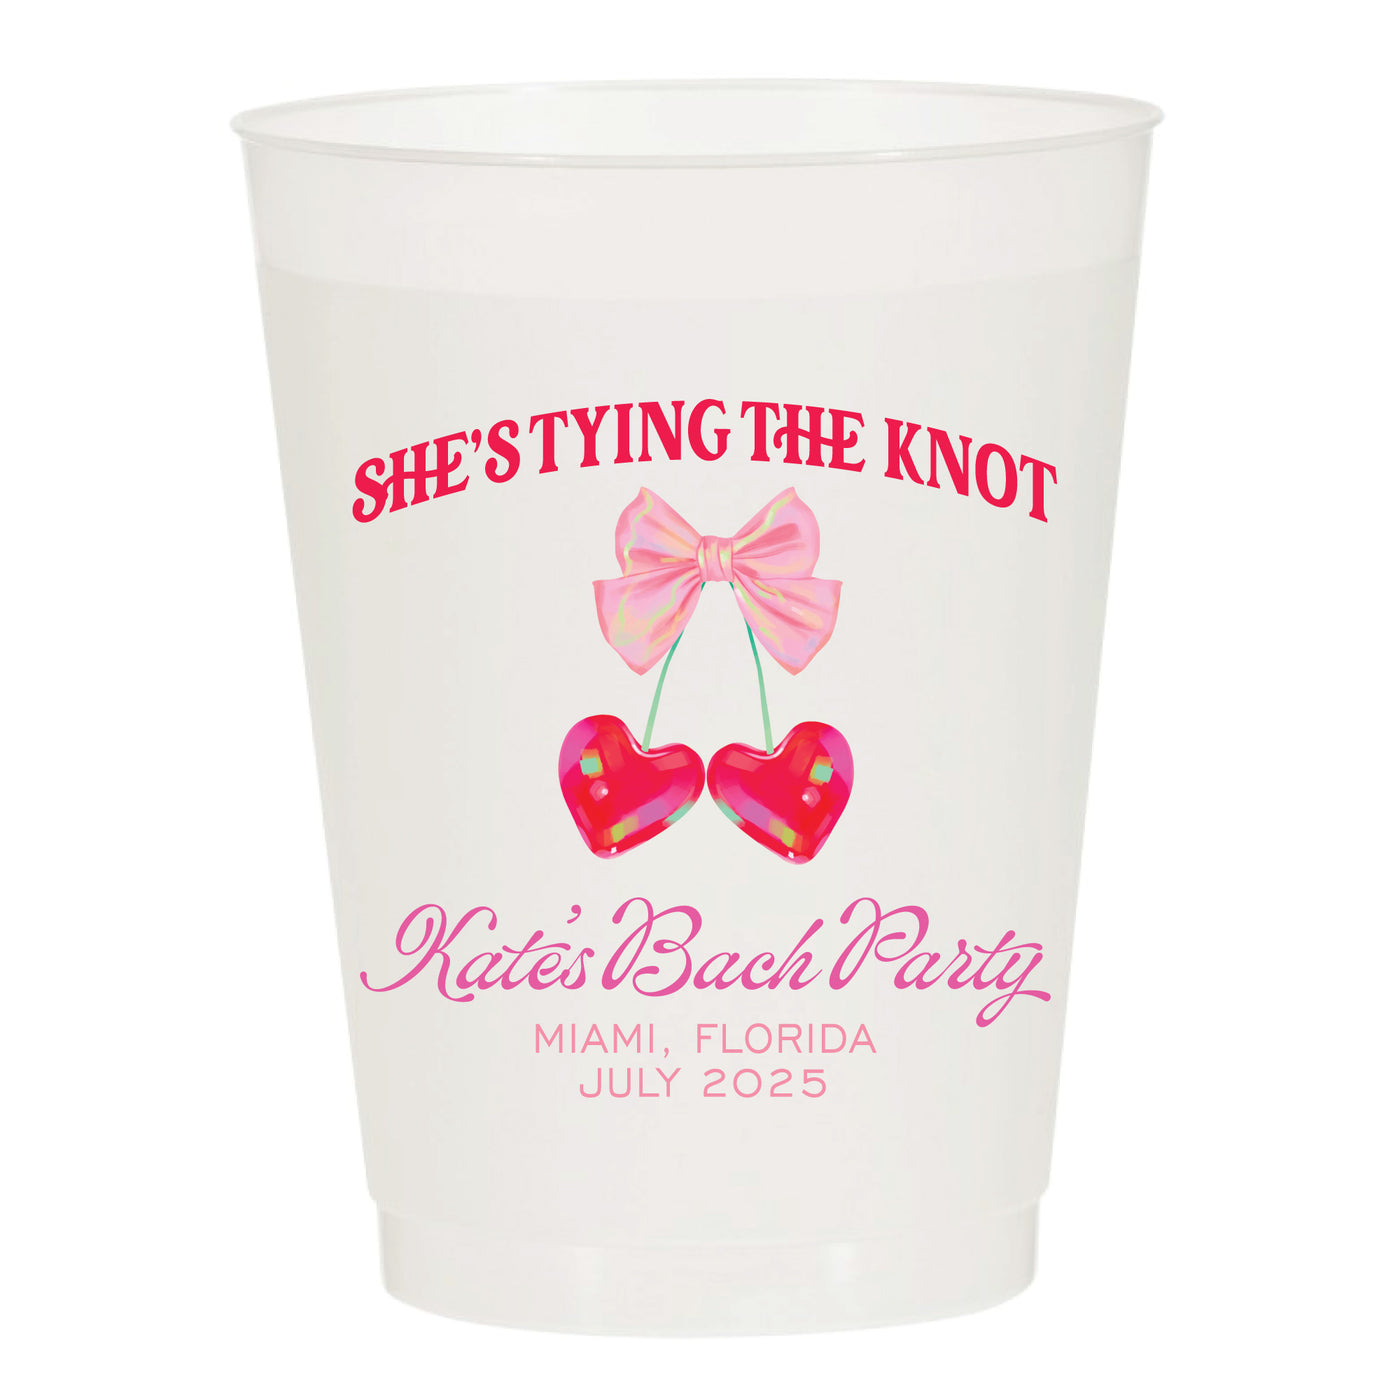 She's Tying The Knot Watercolor Cherry and Bow Bachelorette Frosted Full Color Printed Shatterproof Cups